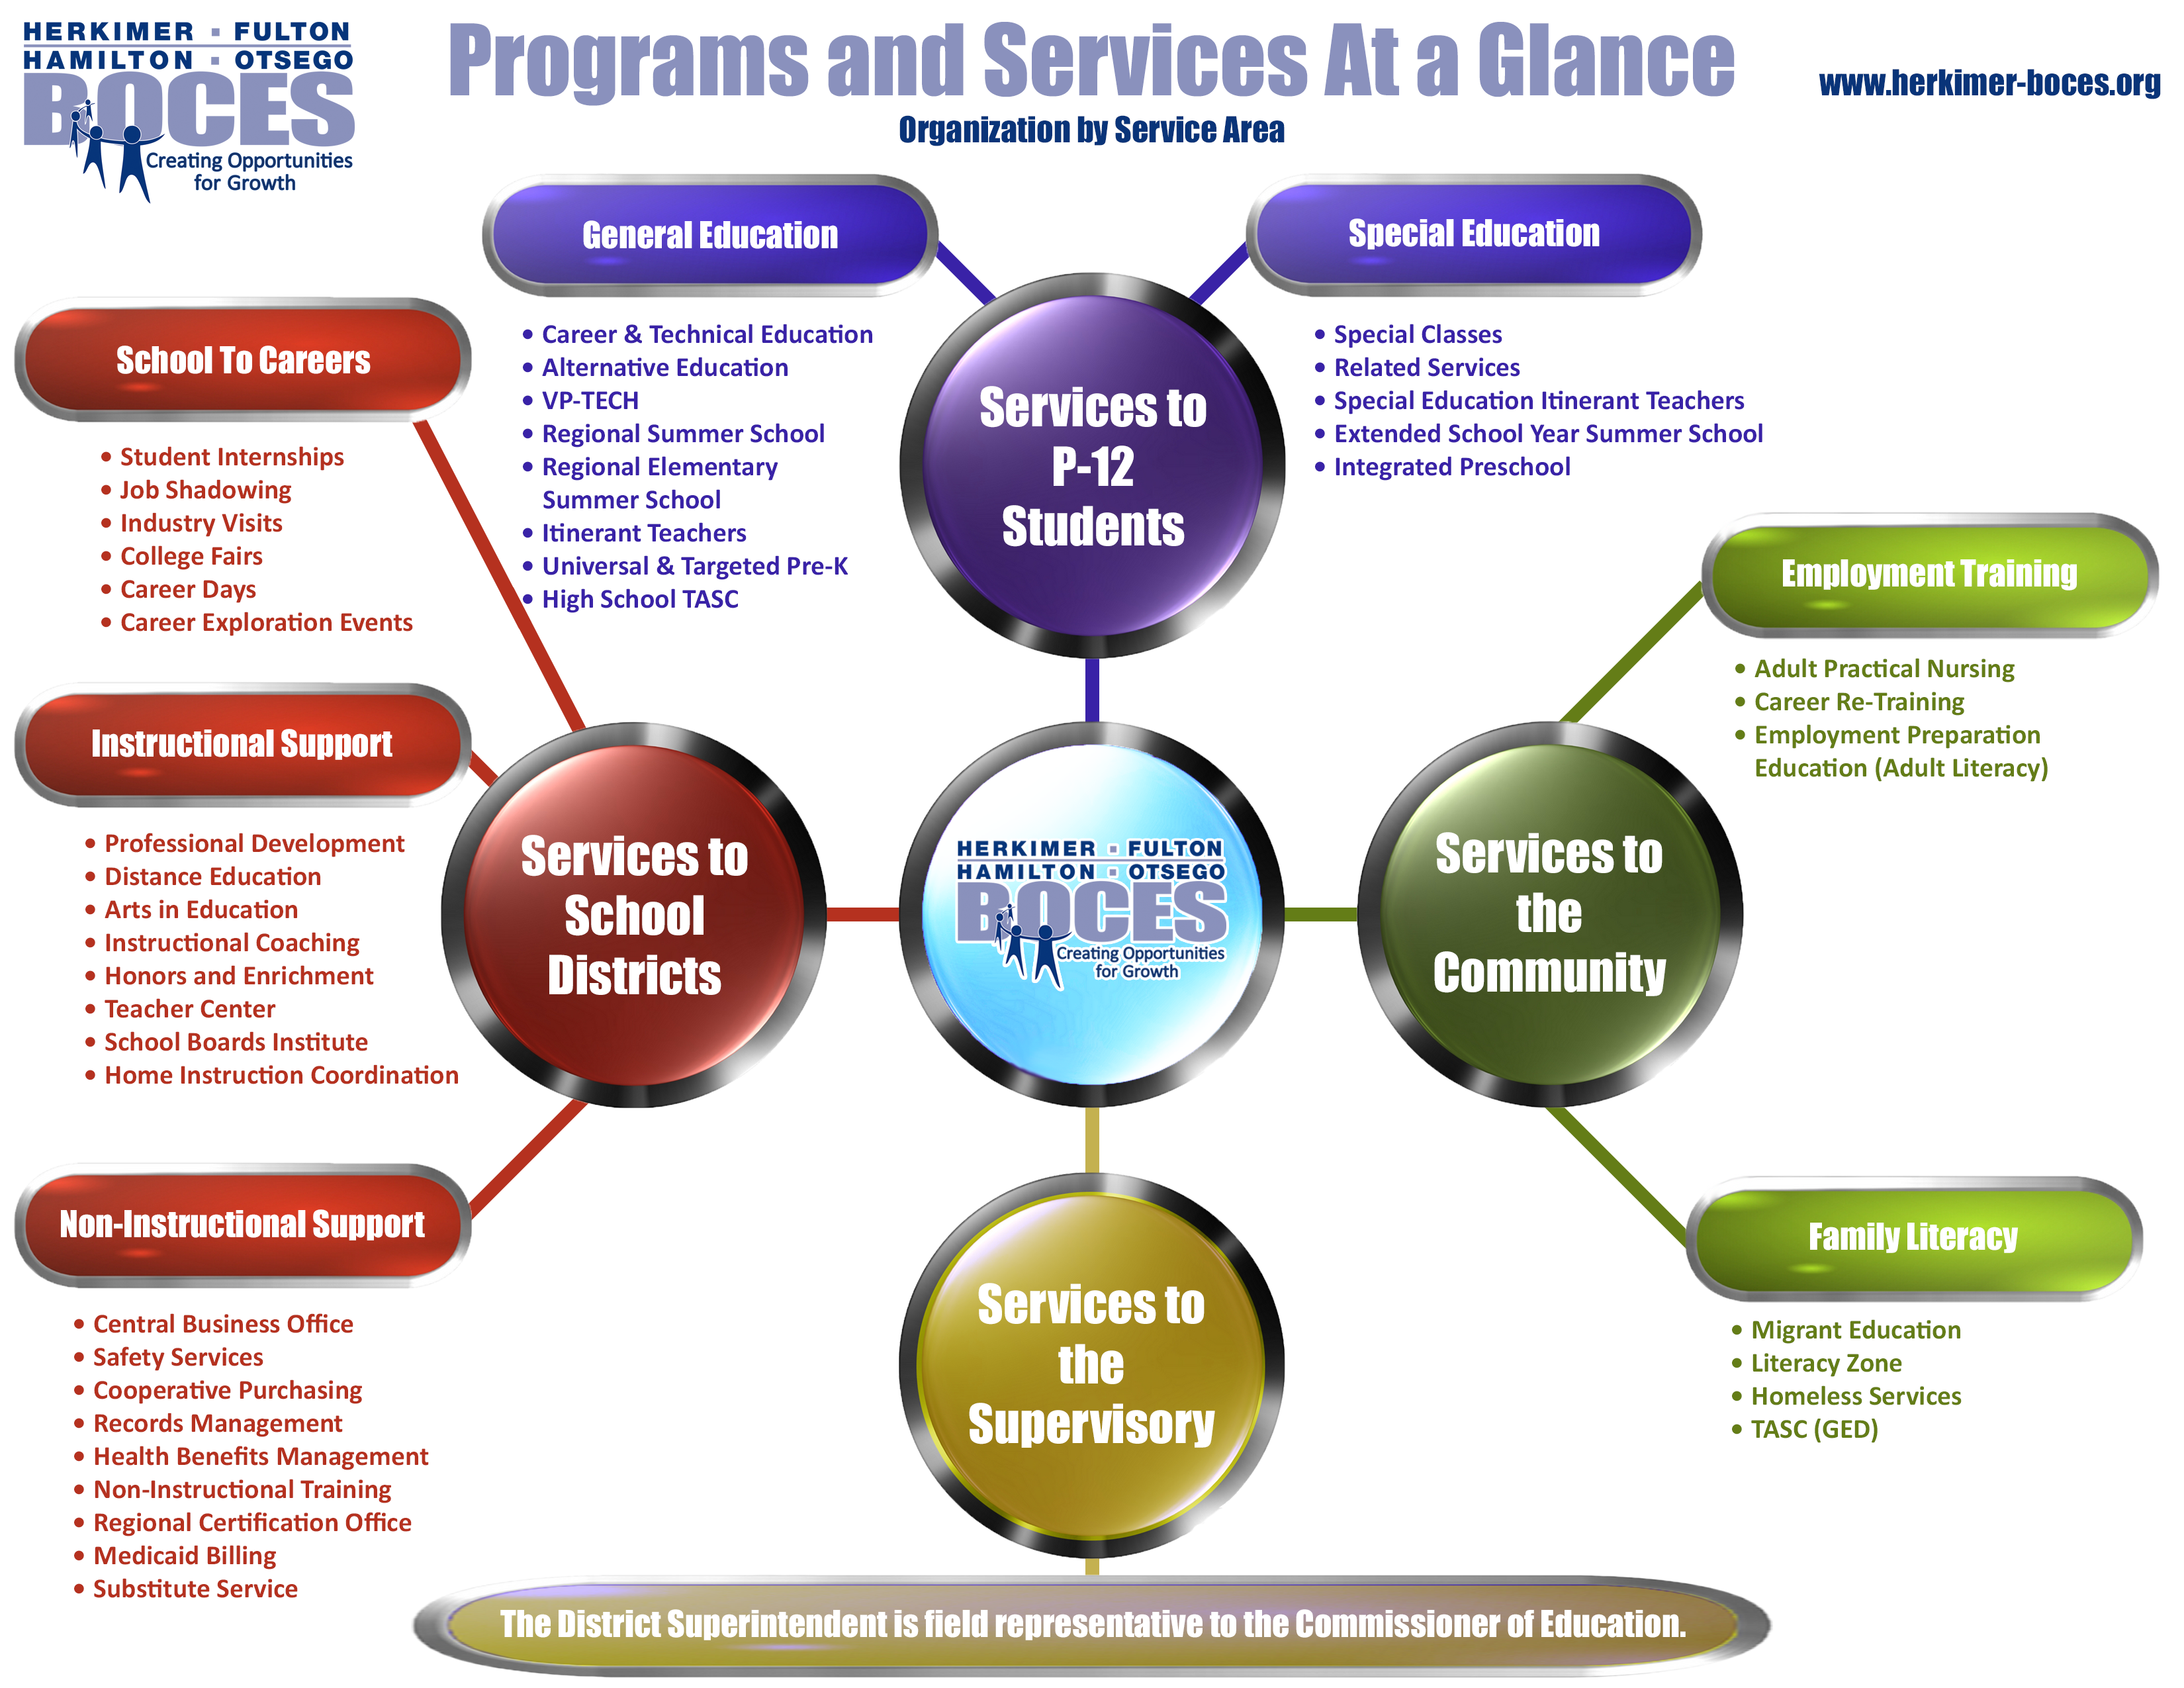 Herkimer BOCES services at a glance chart